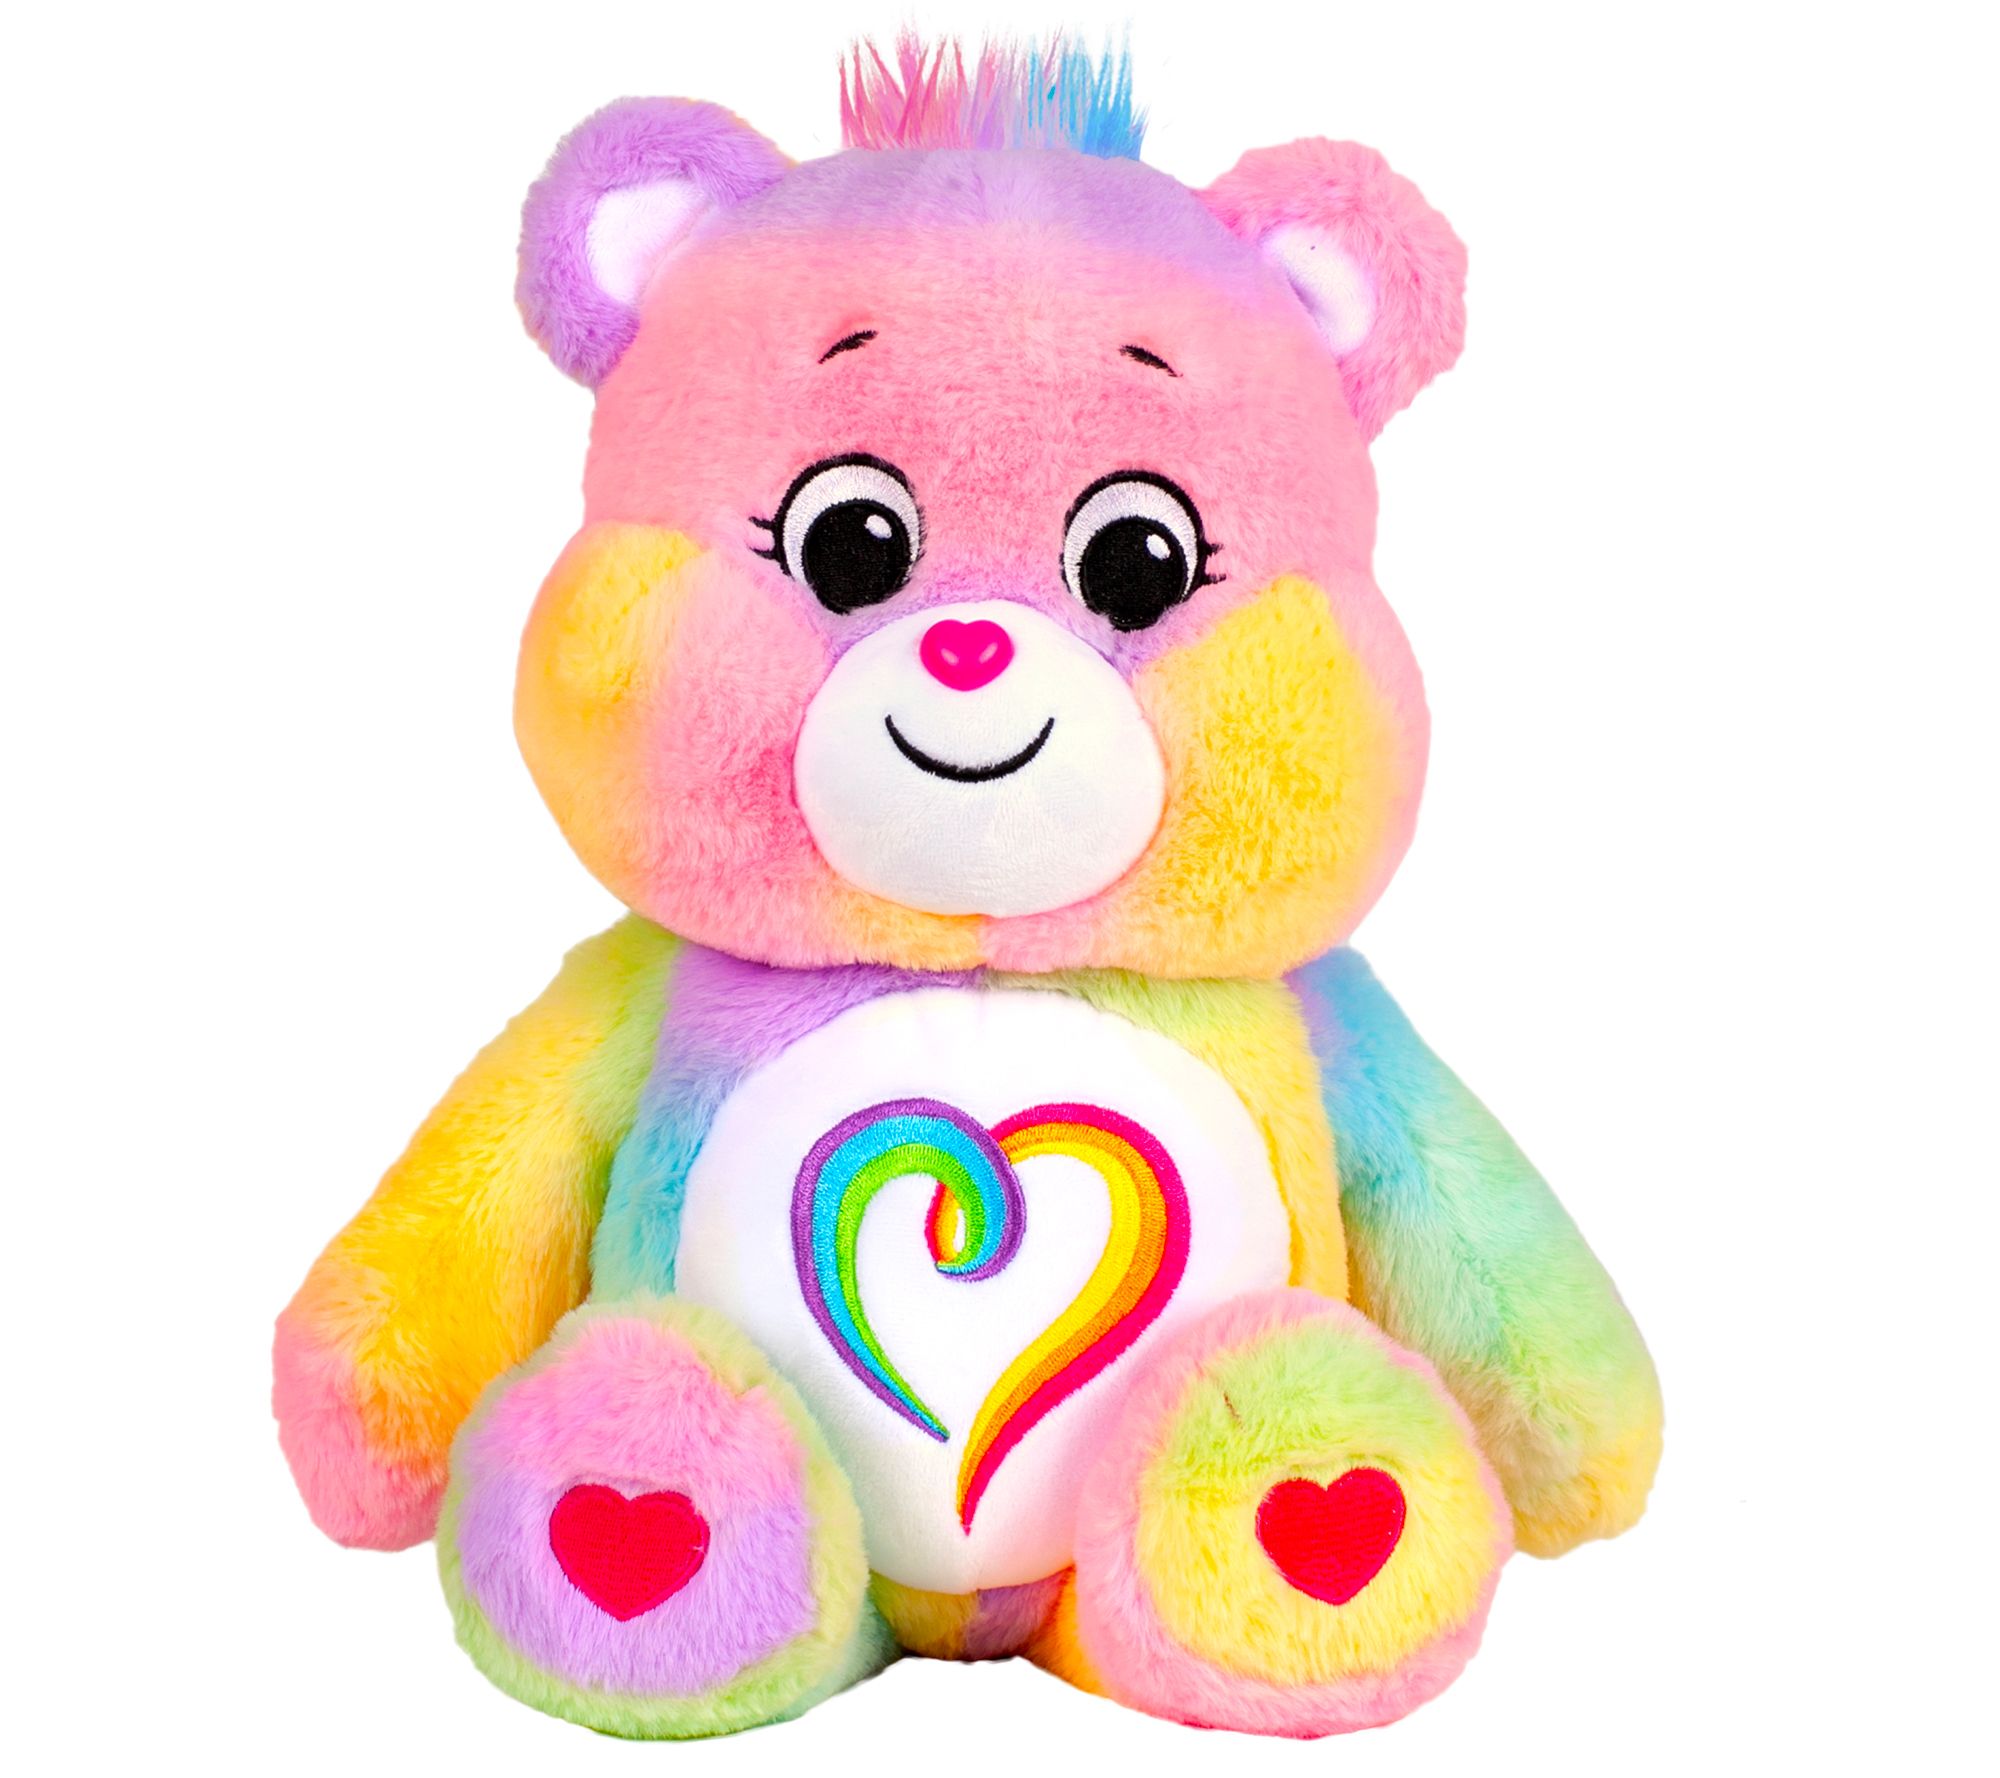 Old Care Bears Cheap Collection, Save 66 jlcatj.gob.mx